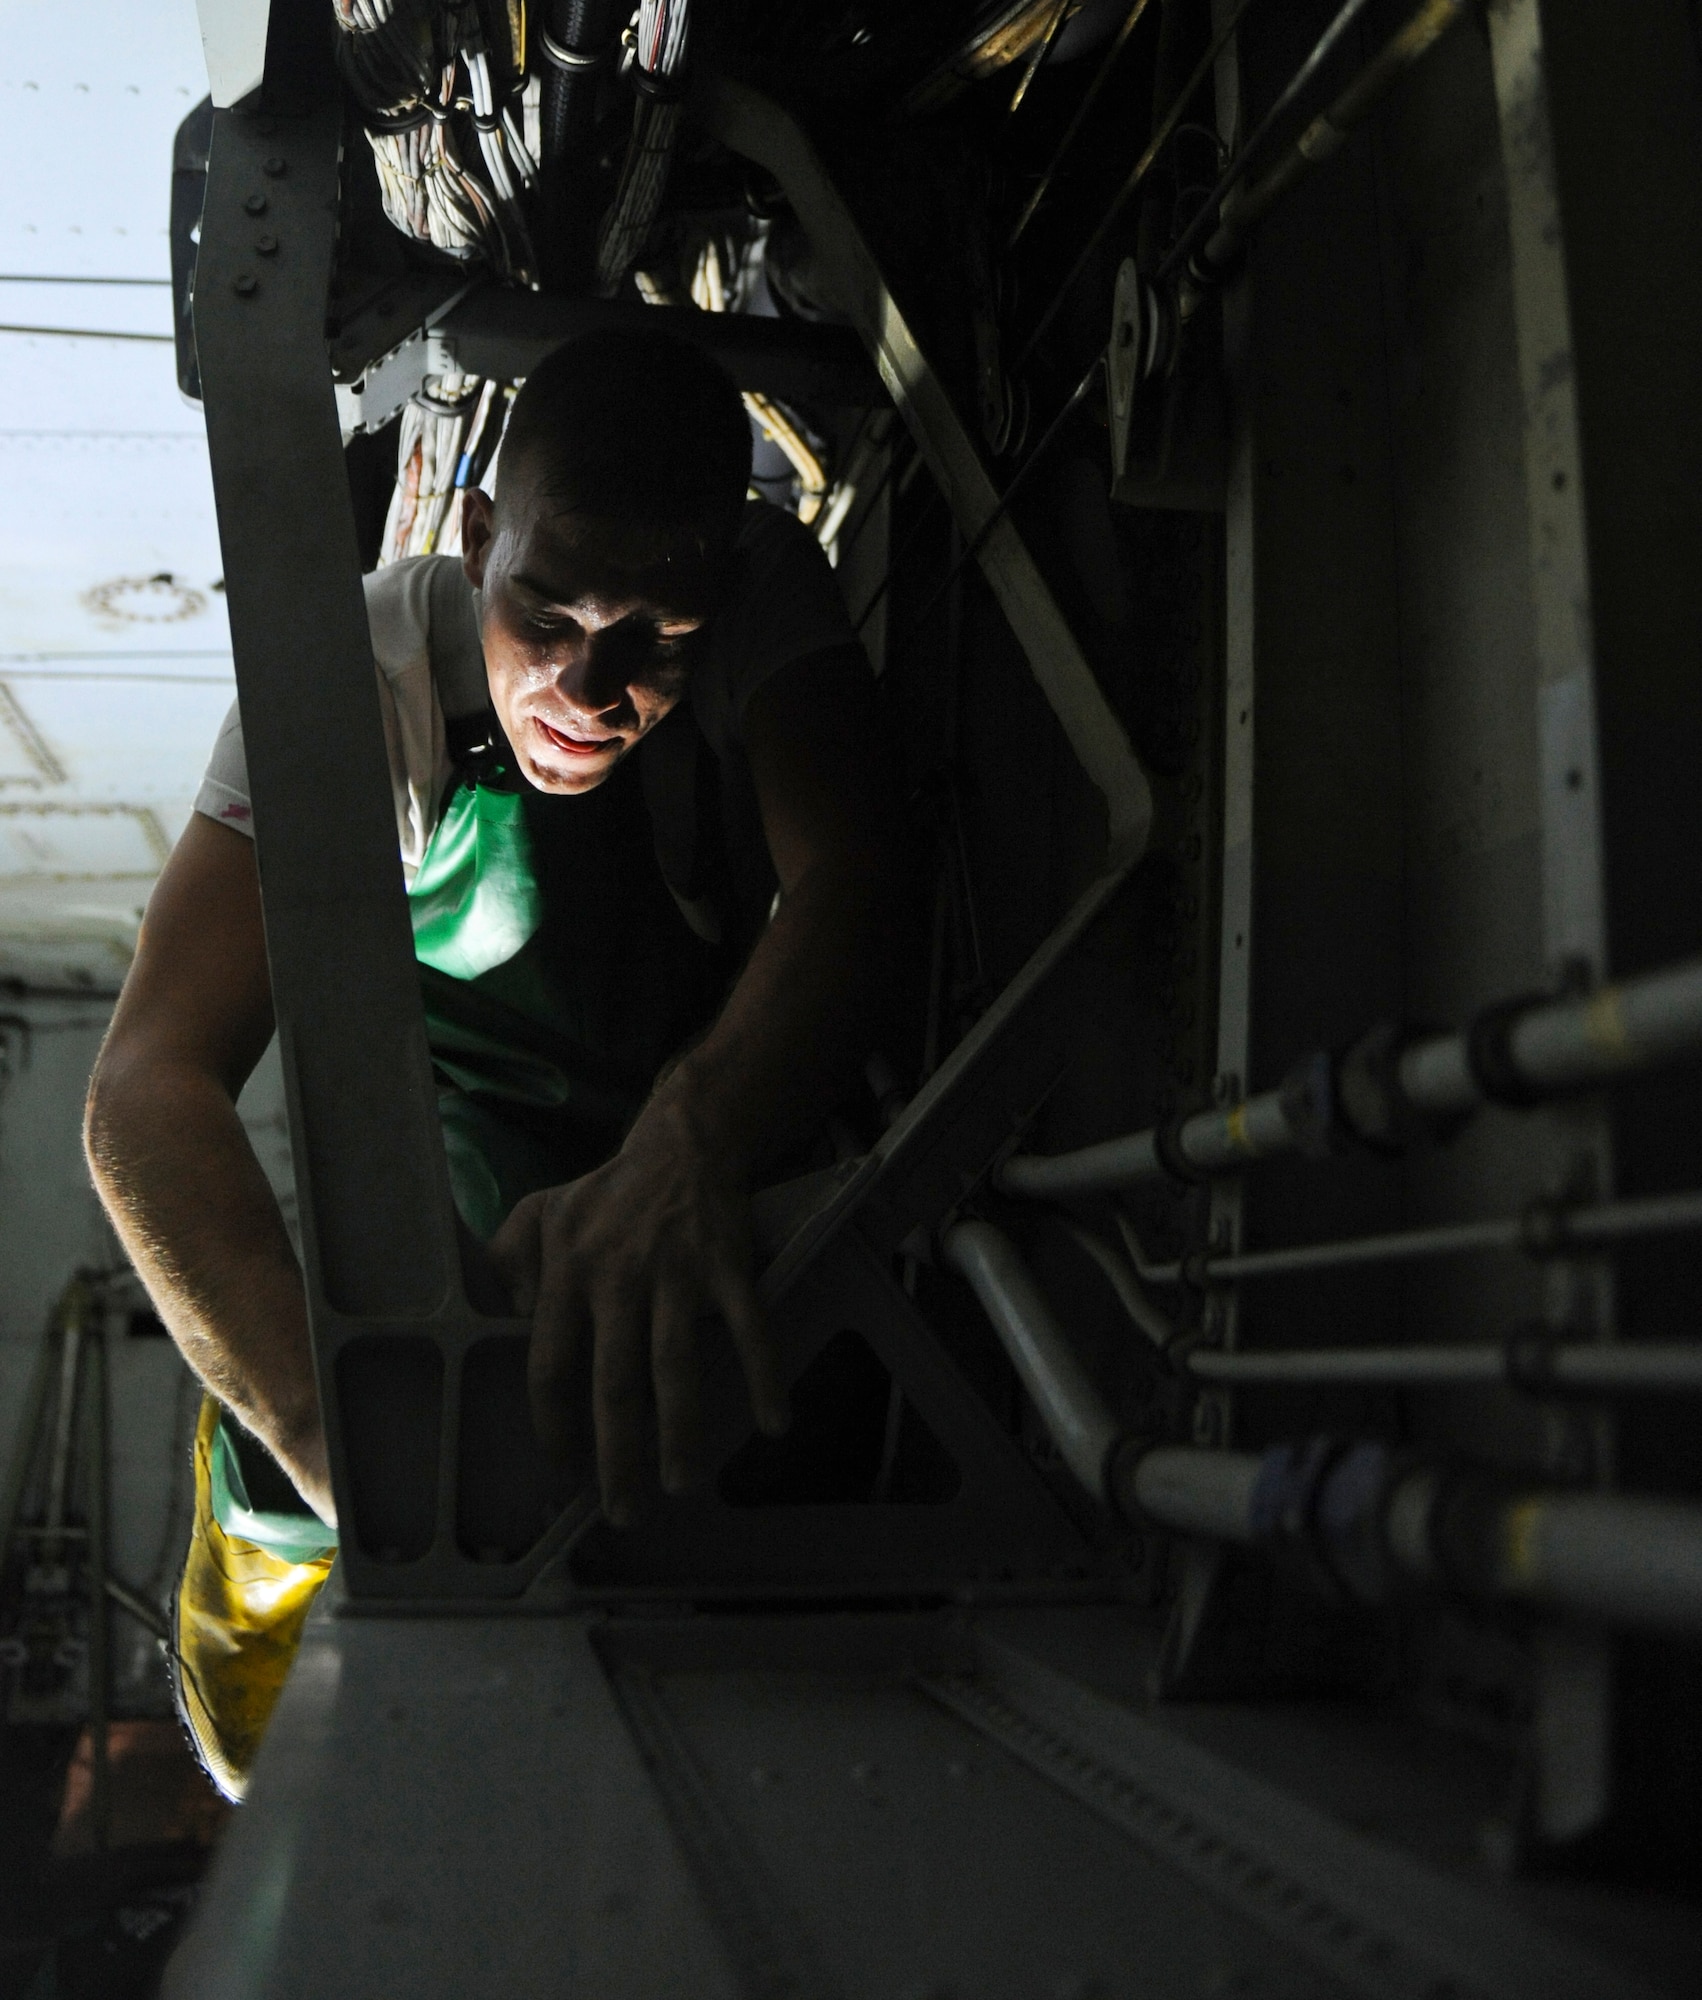 An Airman from the 2nd Maintenance Squadron scrubs the crawl space inside the bomb-bay of a B-52H Stratofortress on Barksdale Air Force Base, La., Aug. 22. B-52s are brought into the corrosion hangar after 450 flying hours to be cleaned. Along with the exterior, the aircraft?s bomb-bay, landing gears and entryway are scrubbed clean. (U.S. Air Force photo/Airman 1st Class Micaiah Anthony)(RELEASED)